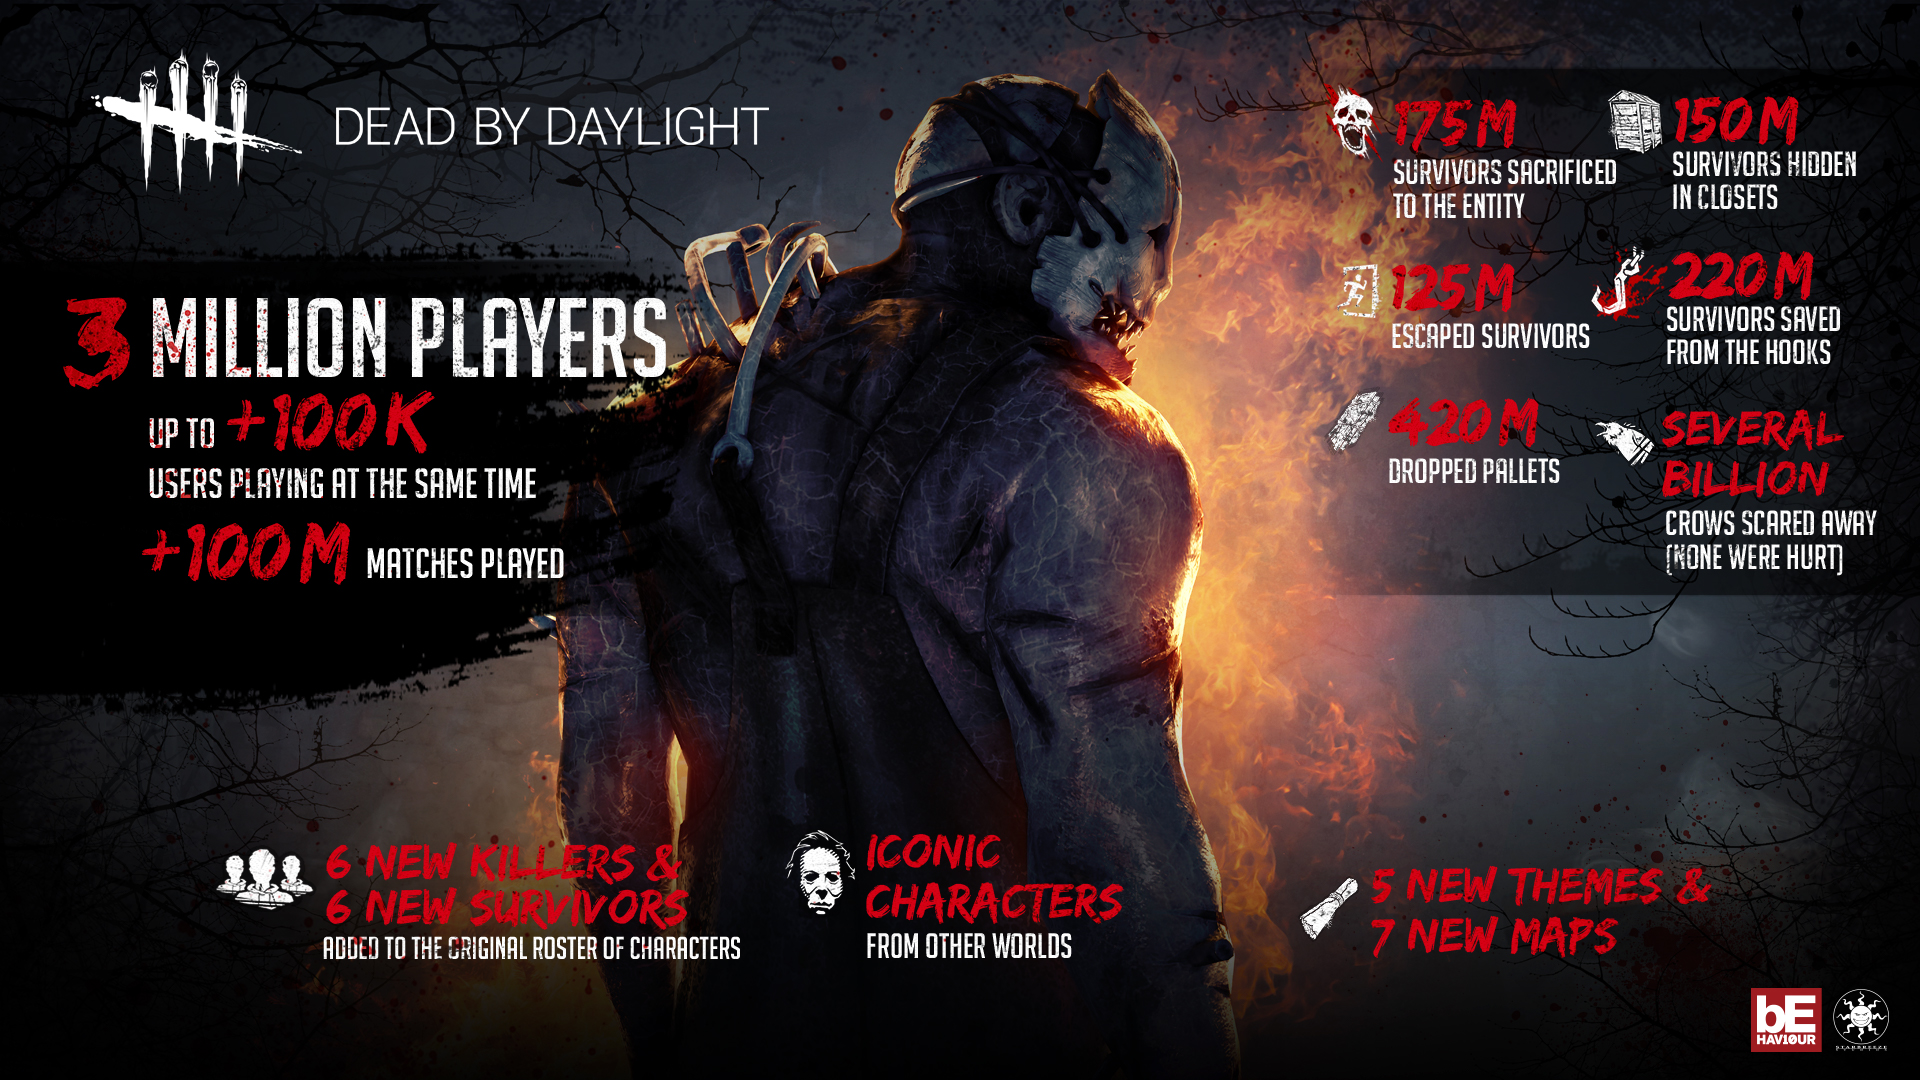 Dead By Daylight Surpasses 3 Million Sold Games As The Title Launches Digitally For Playstation 4 In Asia Starbreeze